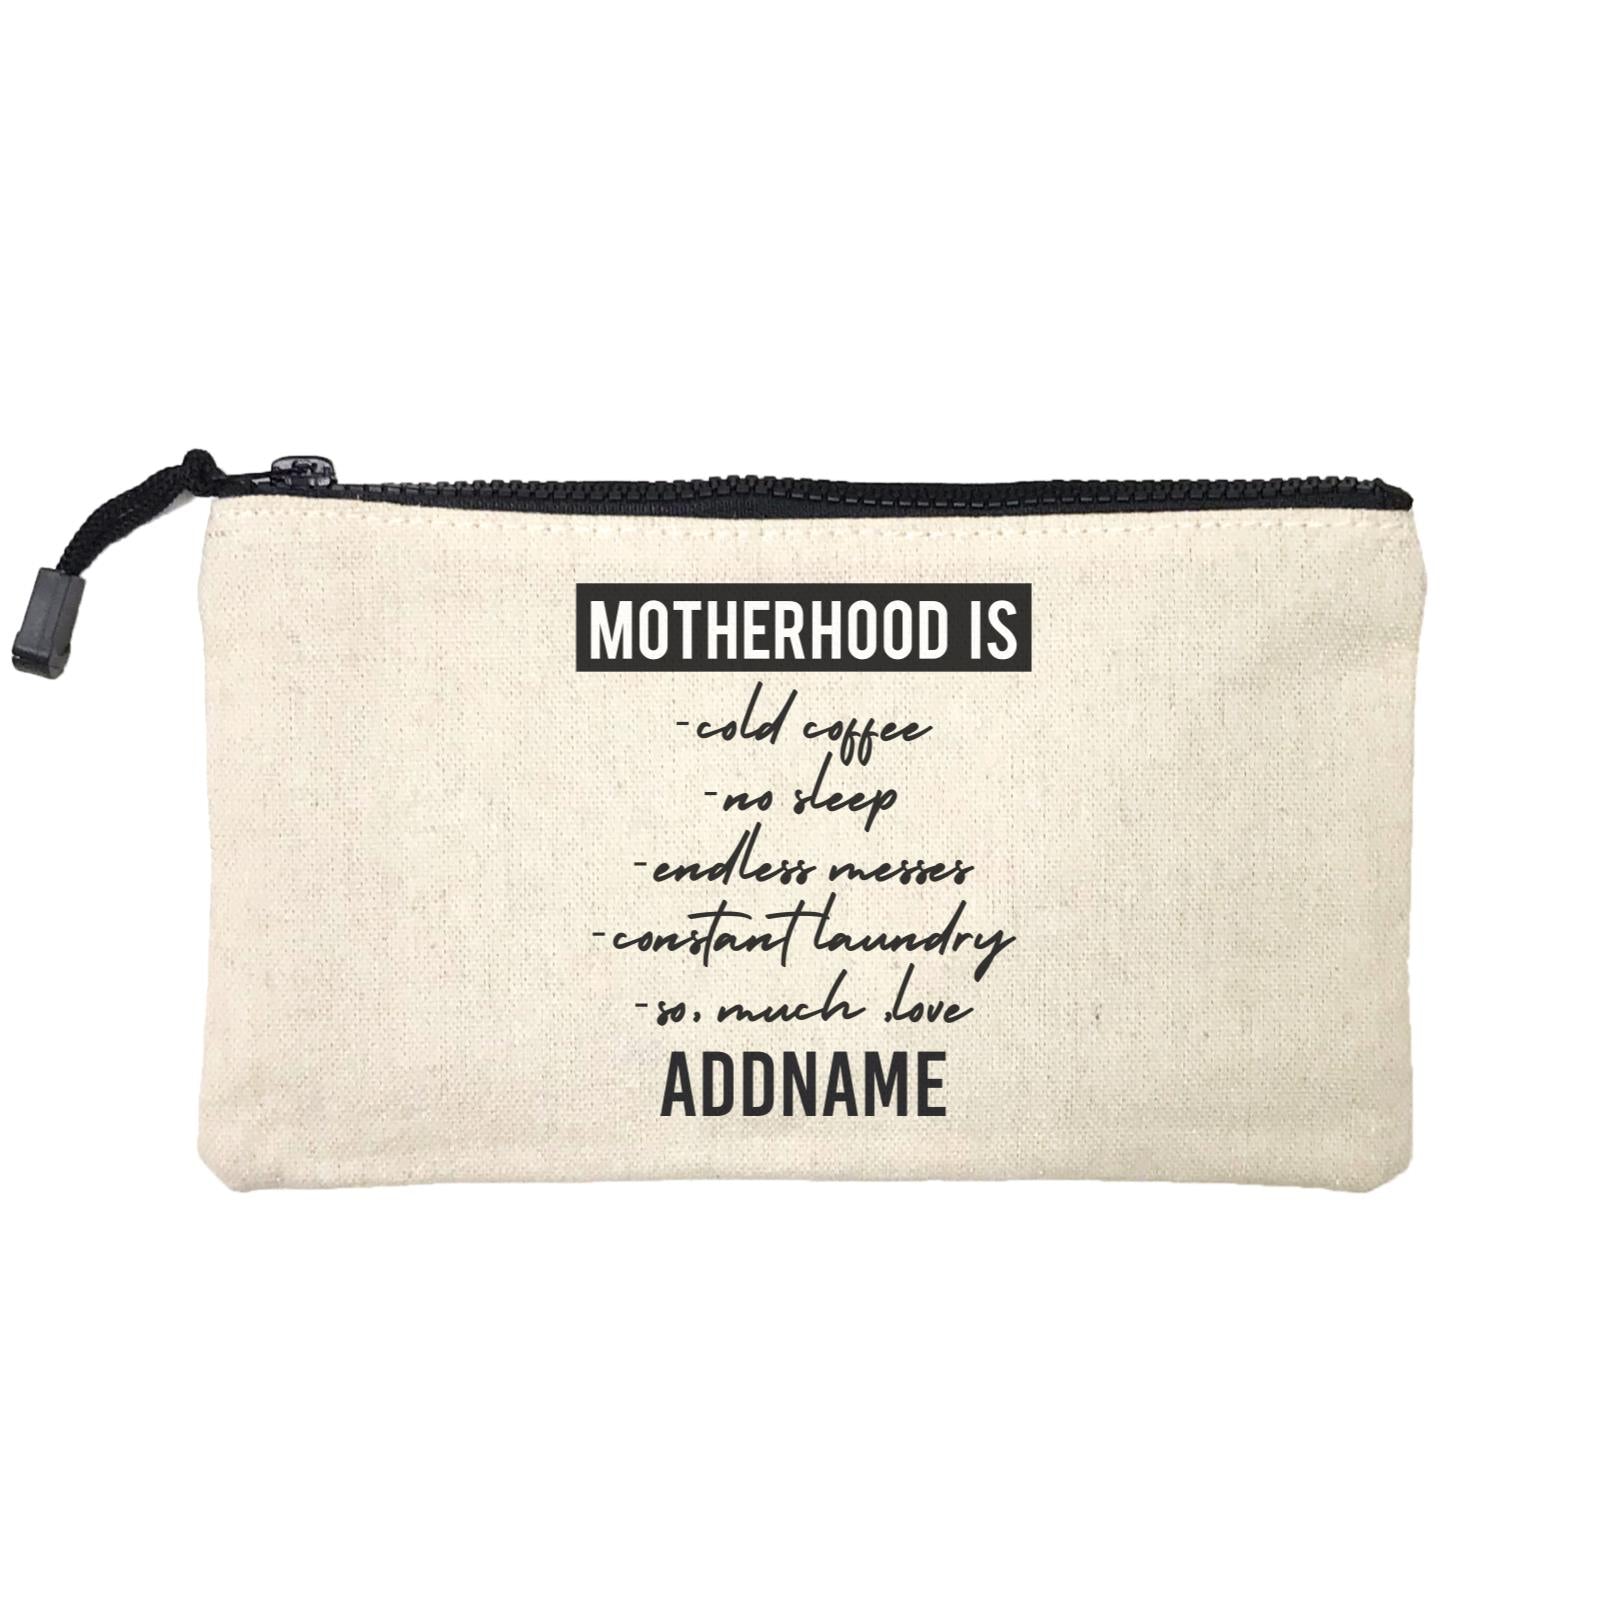 Funny Mom Quotes Motherhood Is So Much Love Addname Mini Accessories Stationery Pouch